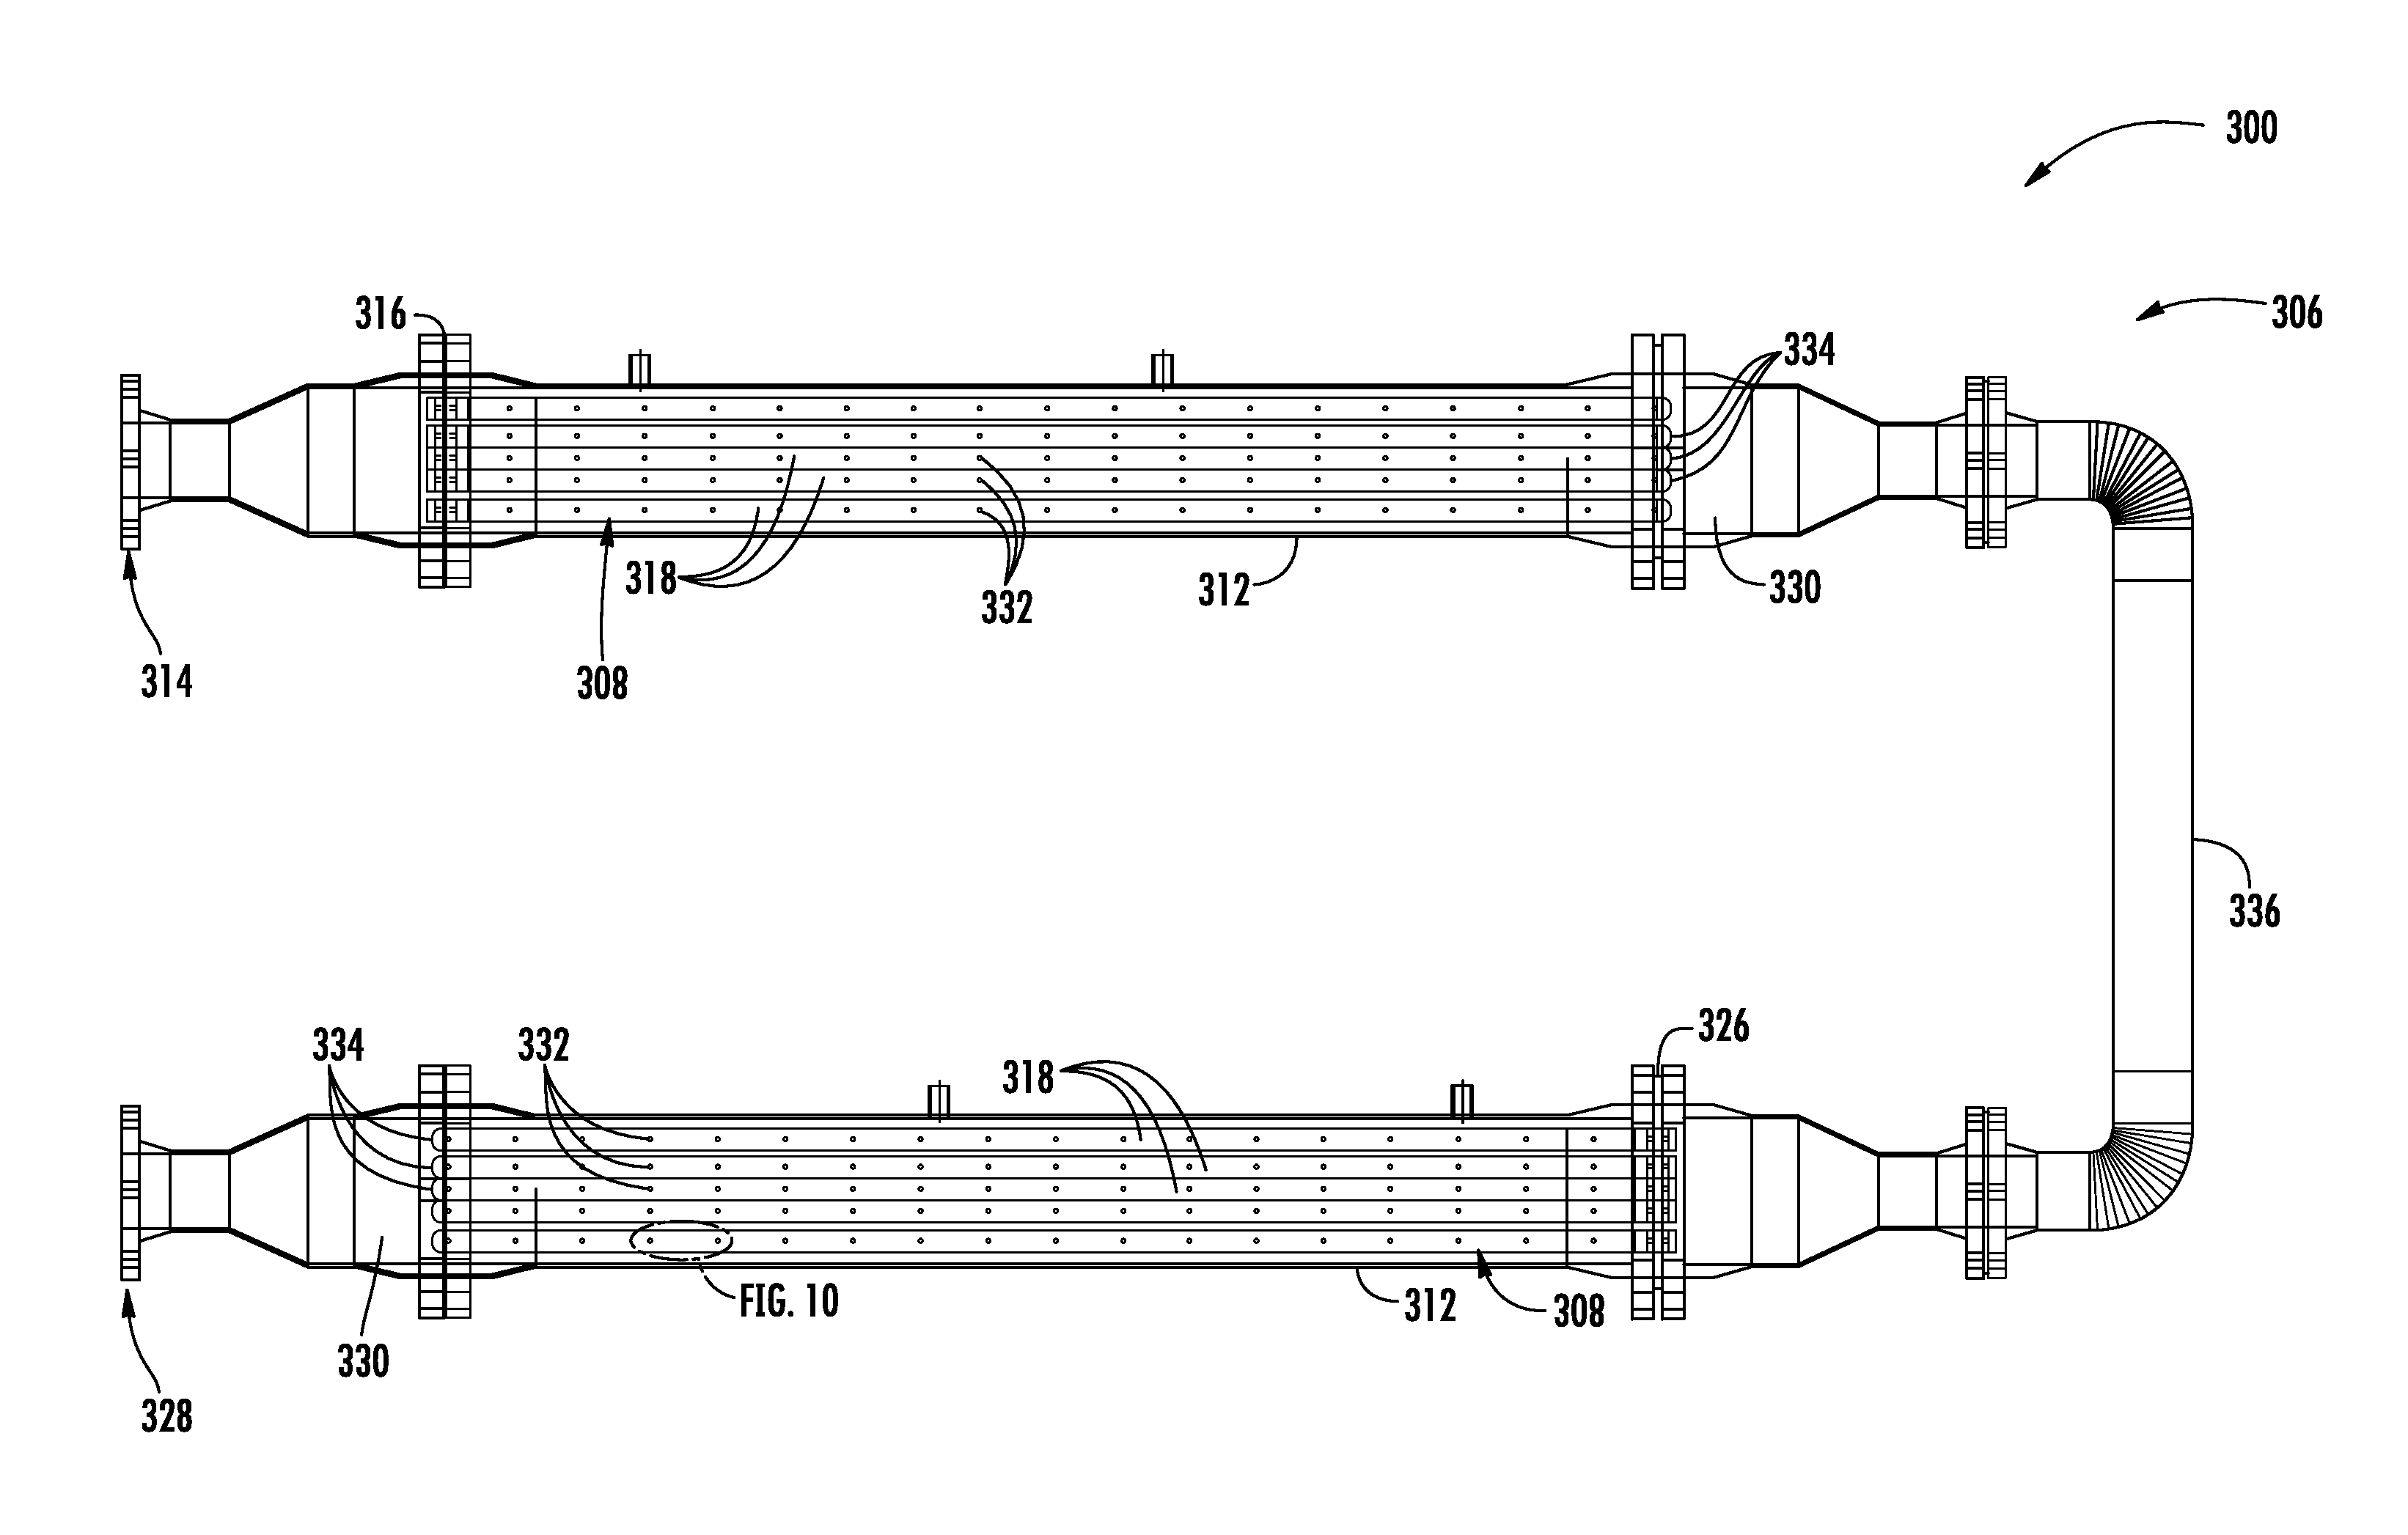 Waste separation and processing system